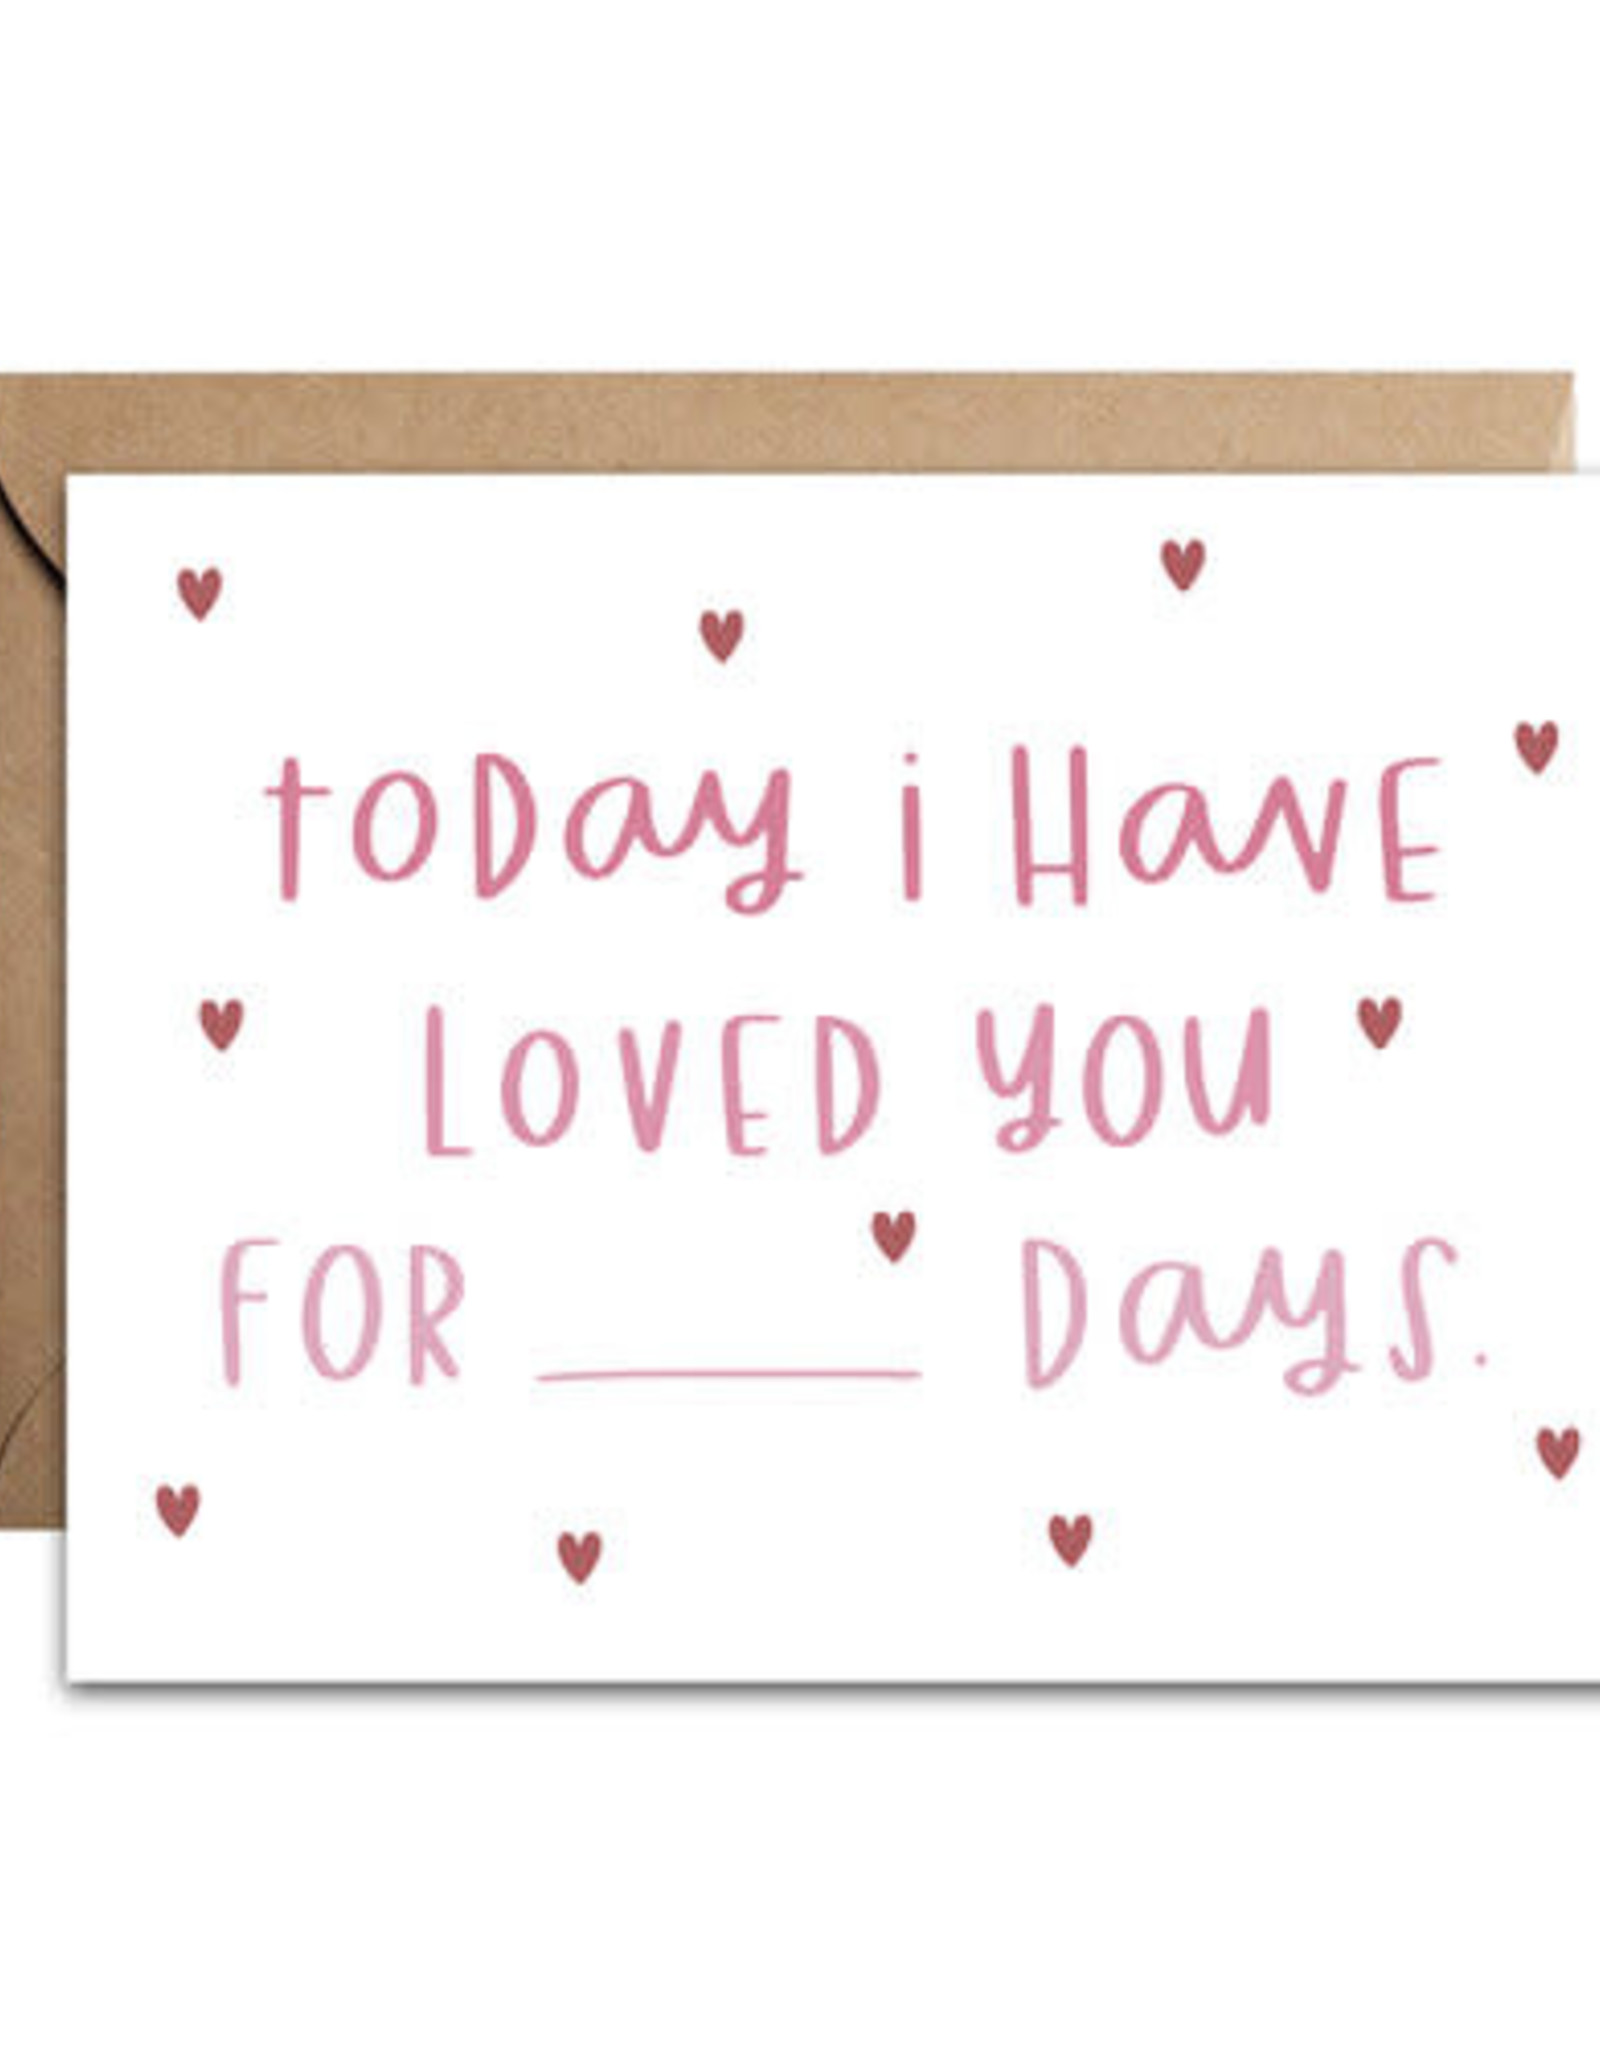 Pixel Paper Hearts PPH Card - Loved you for